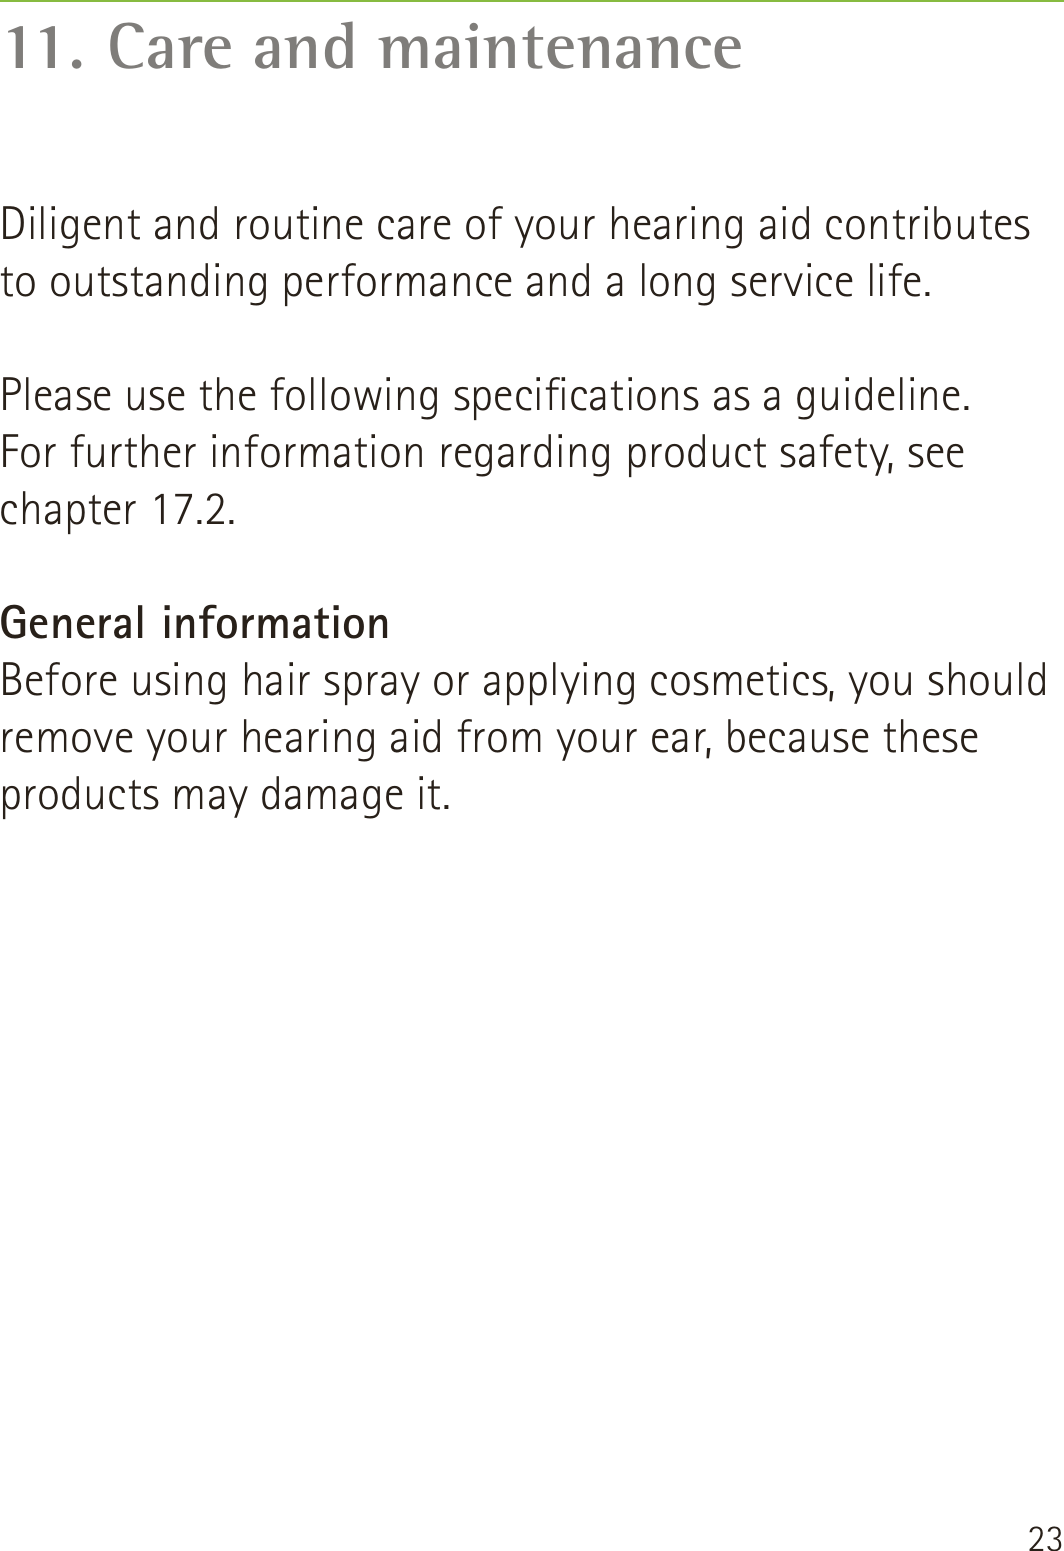 2311. Care and maintenanceDiligent and routine care of your hearing aid contributes to outstanding performance and a long service life.   Please use the following specications as a guideline.  For further information regarding product safety, see  chapter 17.2.General informationBefore using hair spray or applying cosmetics, you should remove your hearing aid from your ear, because these products may damage it.